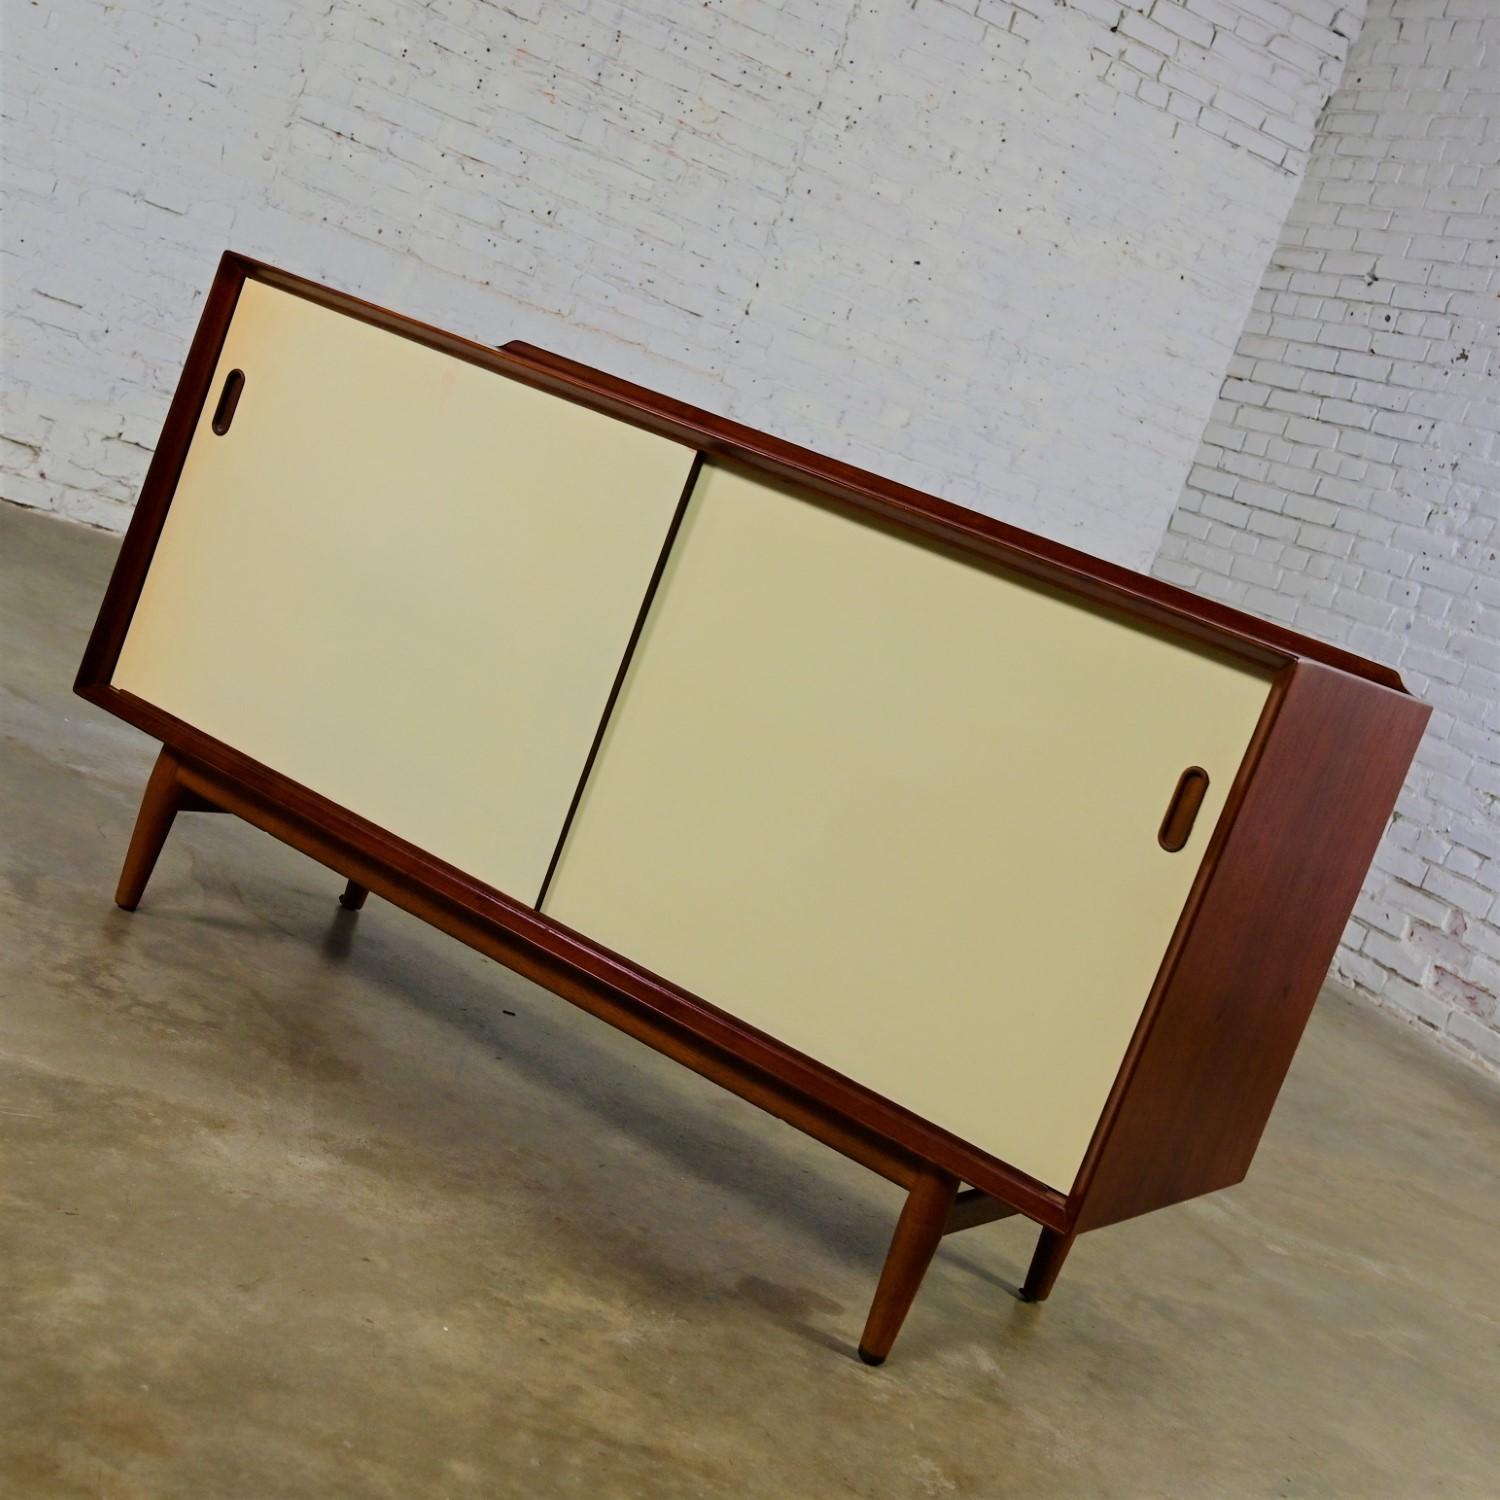 Scandinavian Modern Sibast No 11 Sideboard Buffet Arne Vodder for George Tanier In Good Condition For Sale In Topeka, KS